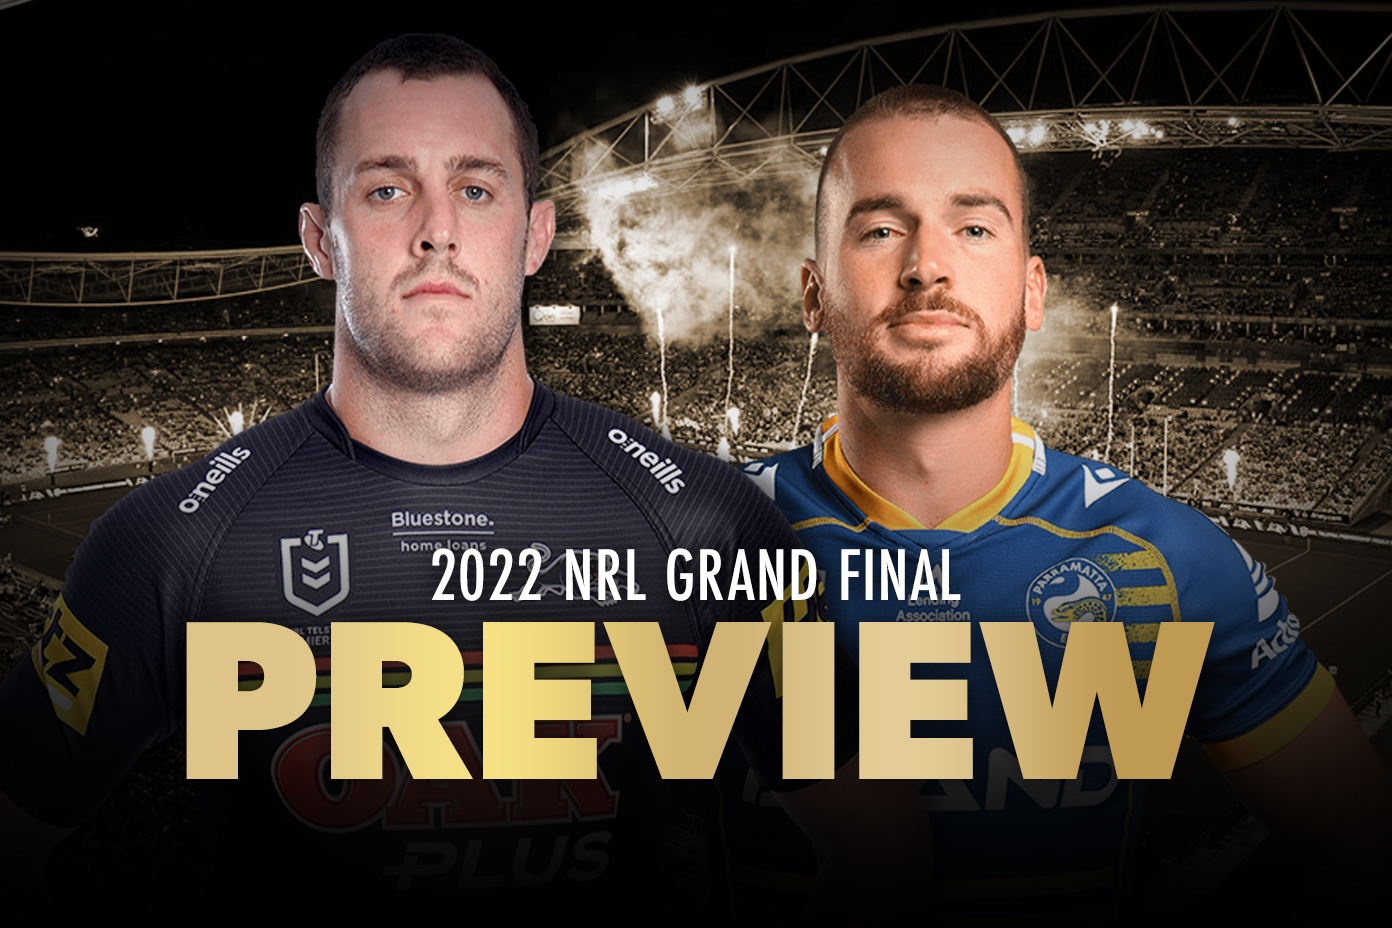 Nrl Grand Final Preview And Prediction Penrith Panthers Vs Parramatta Eels Nrl News Zero Tackle 9297